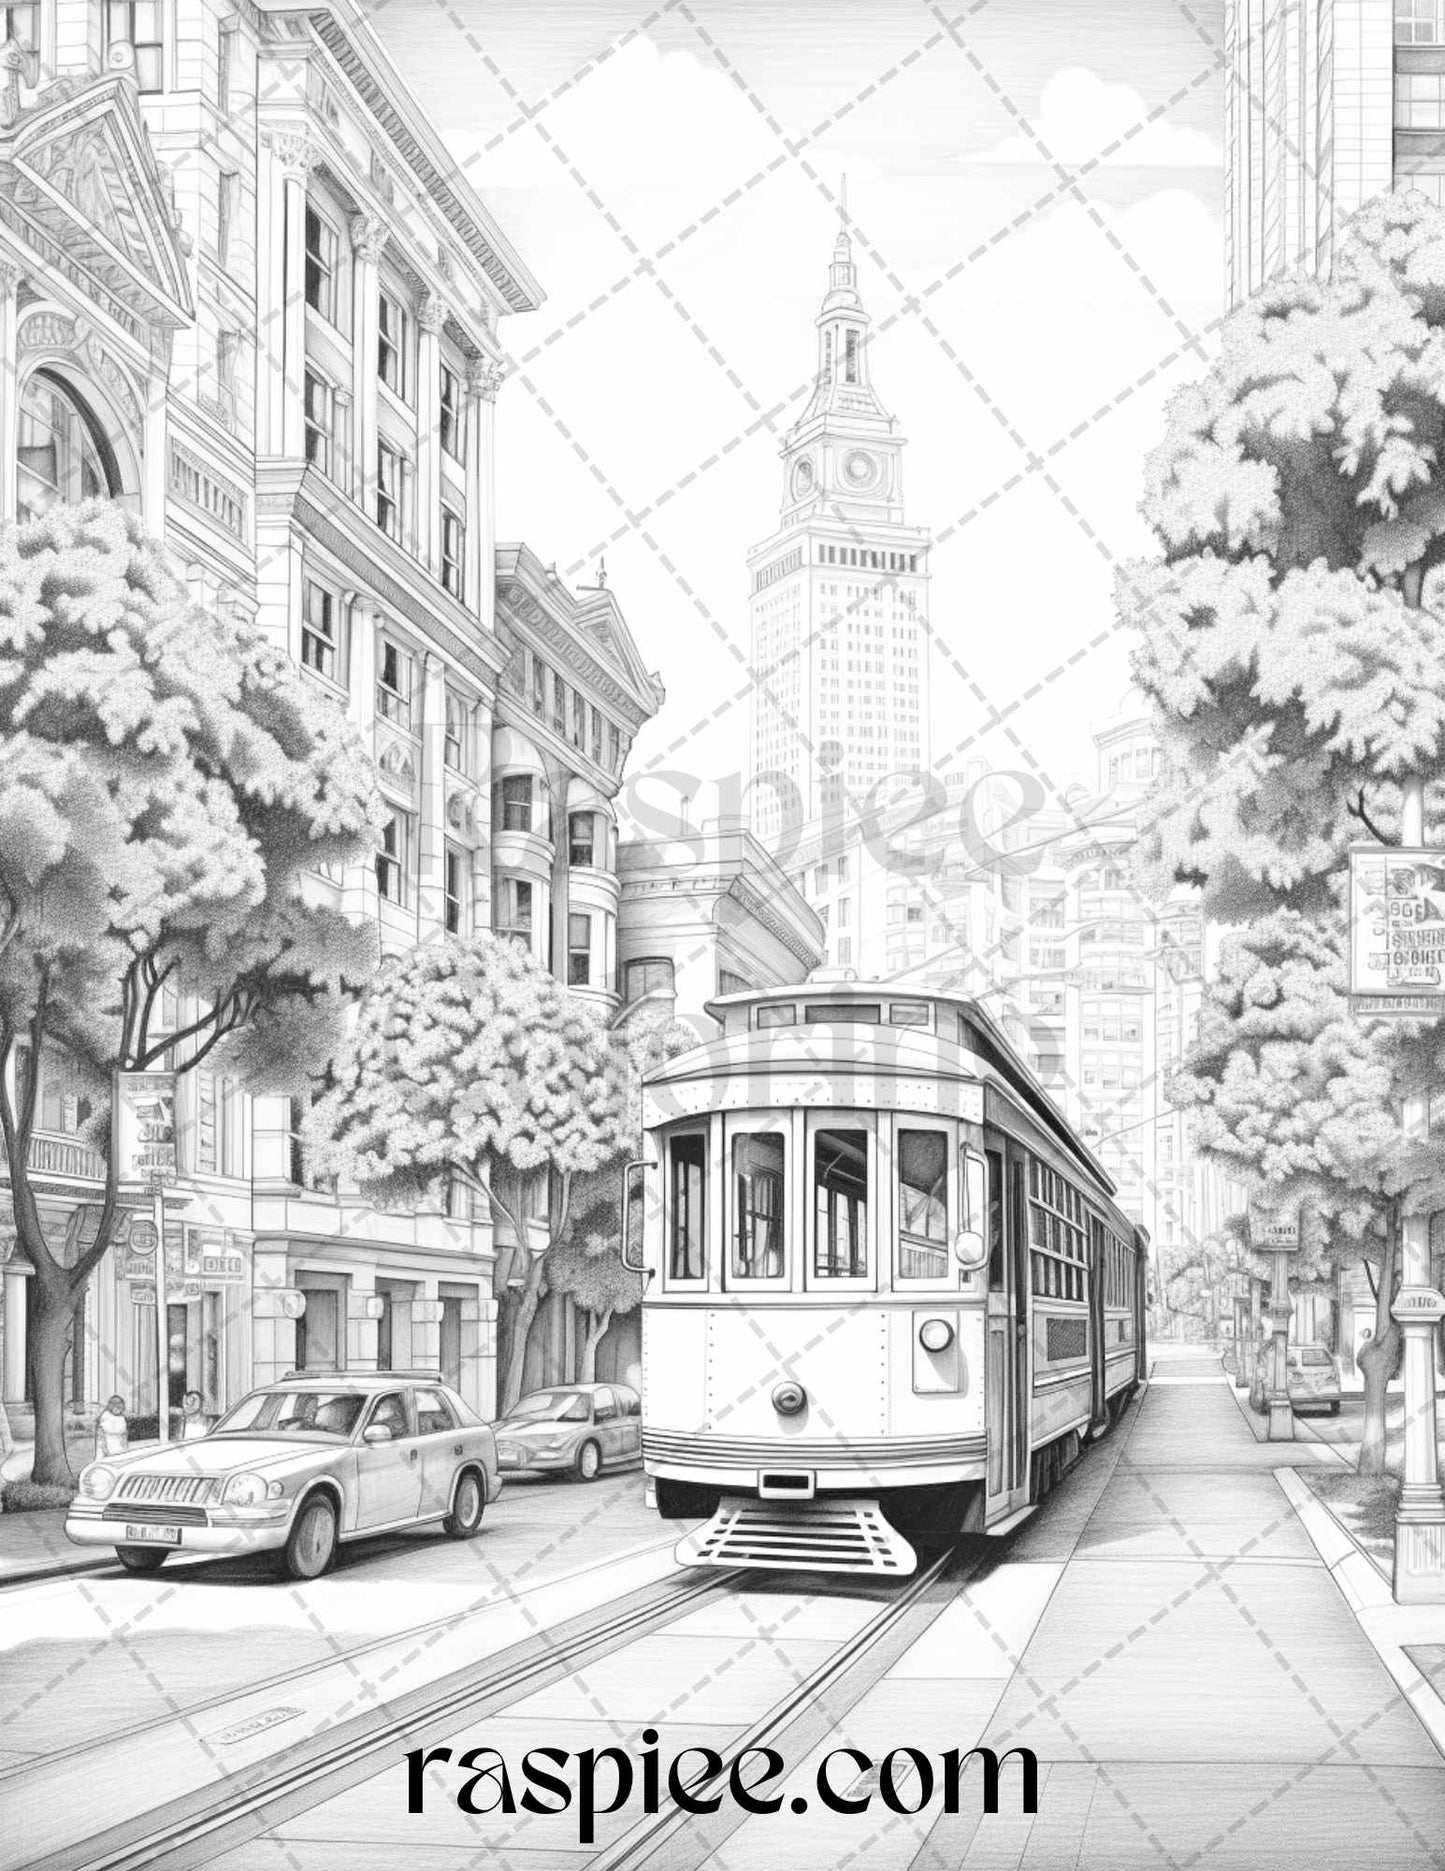 40 Beautiful Cities Travel Grayscale Coloring Pages Printable for Adults, PDF File Instant Download - raspiee